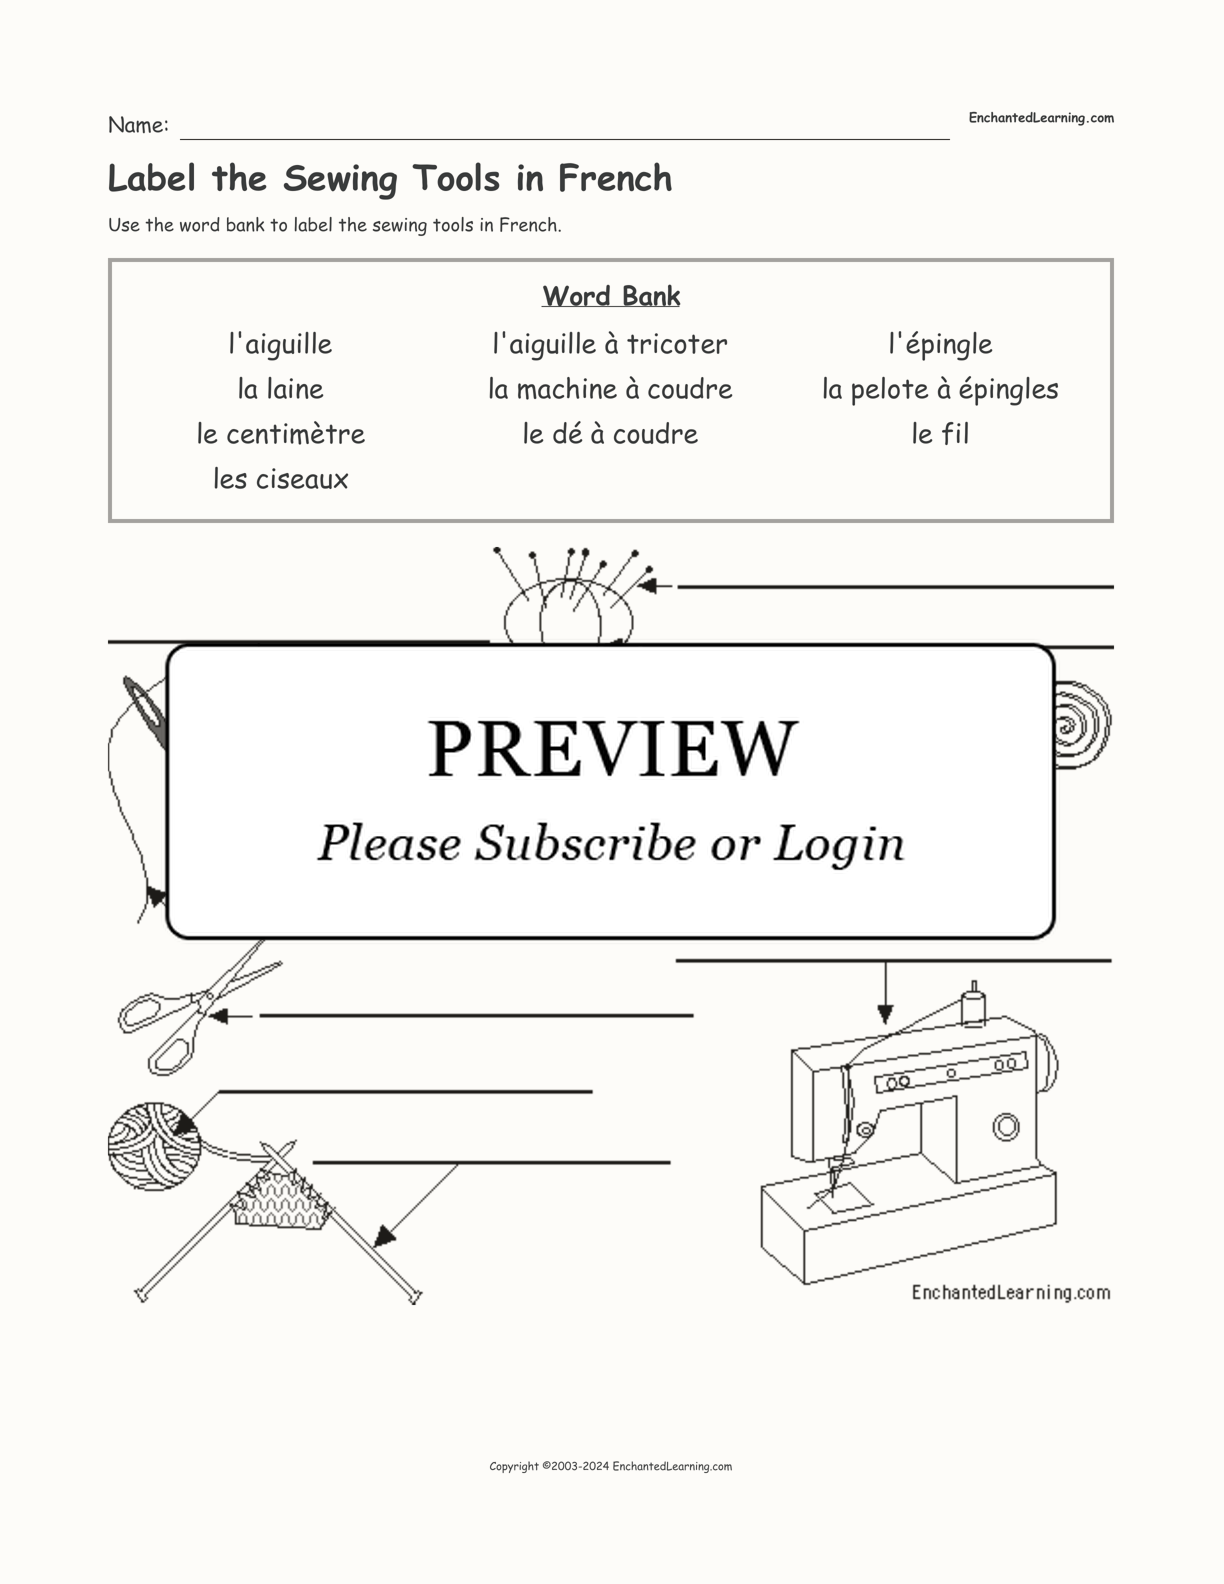 Label the Sewing Tools in French interactive worksheet page 1